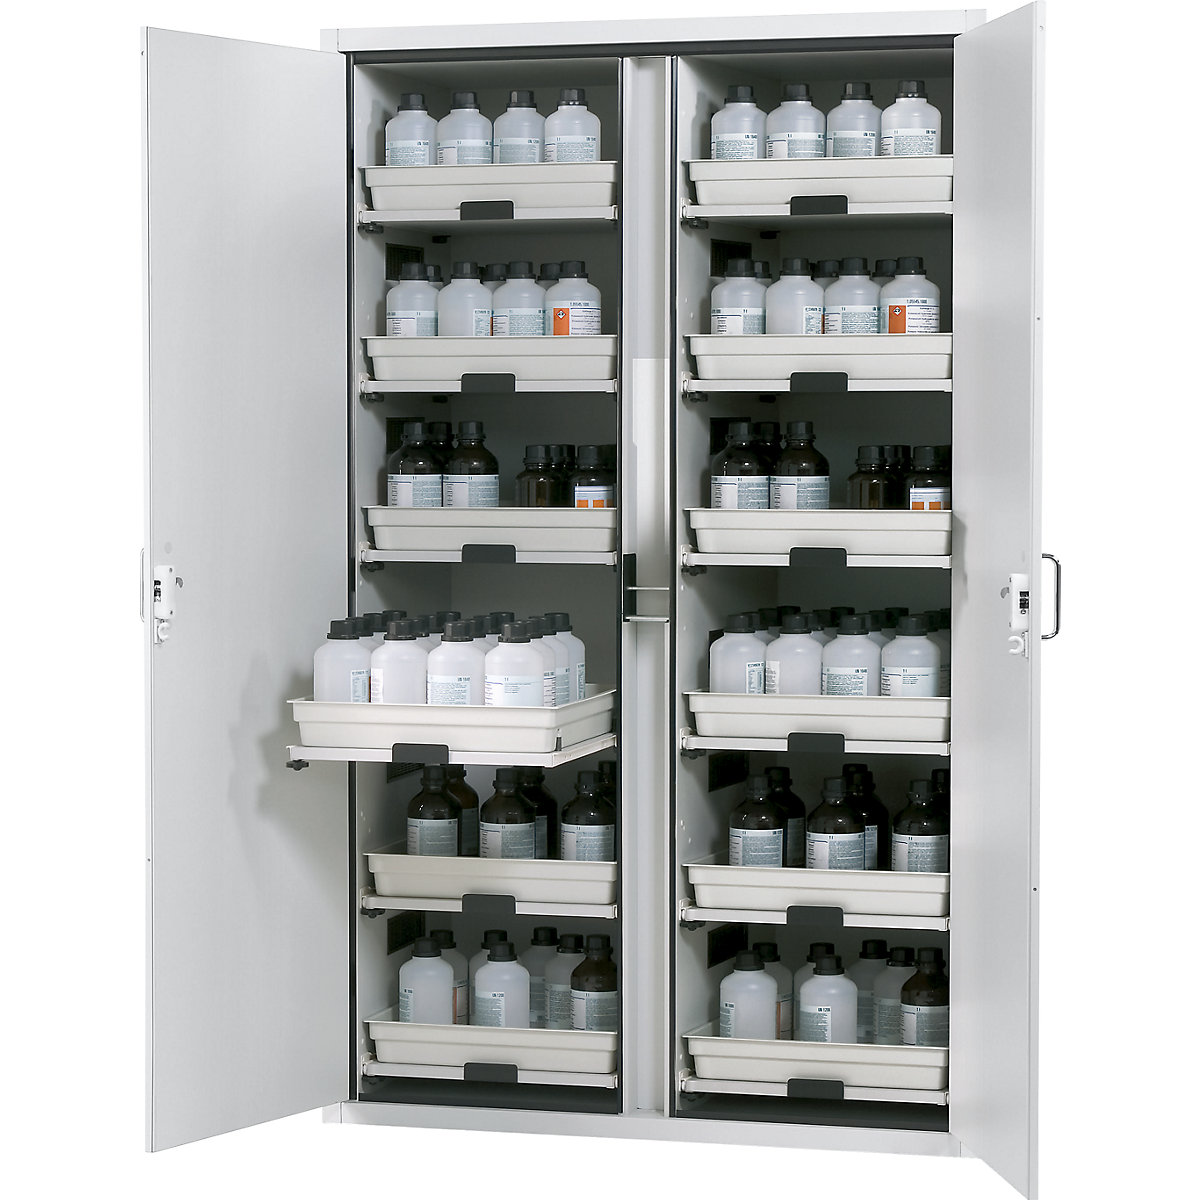 Full height safety cupboard for acids and alkalis – asecos, 2-door, with 12 drawers-3